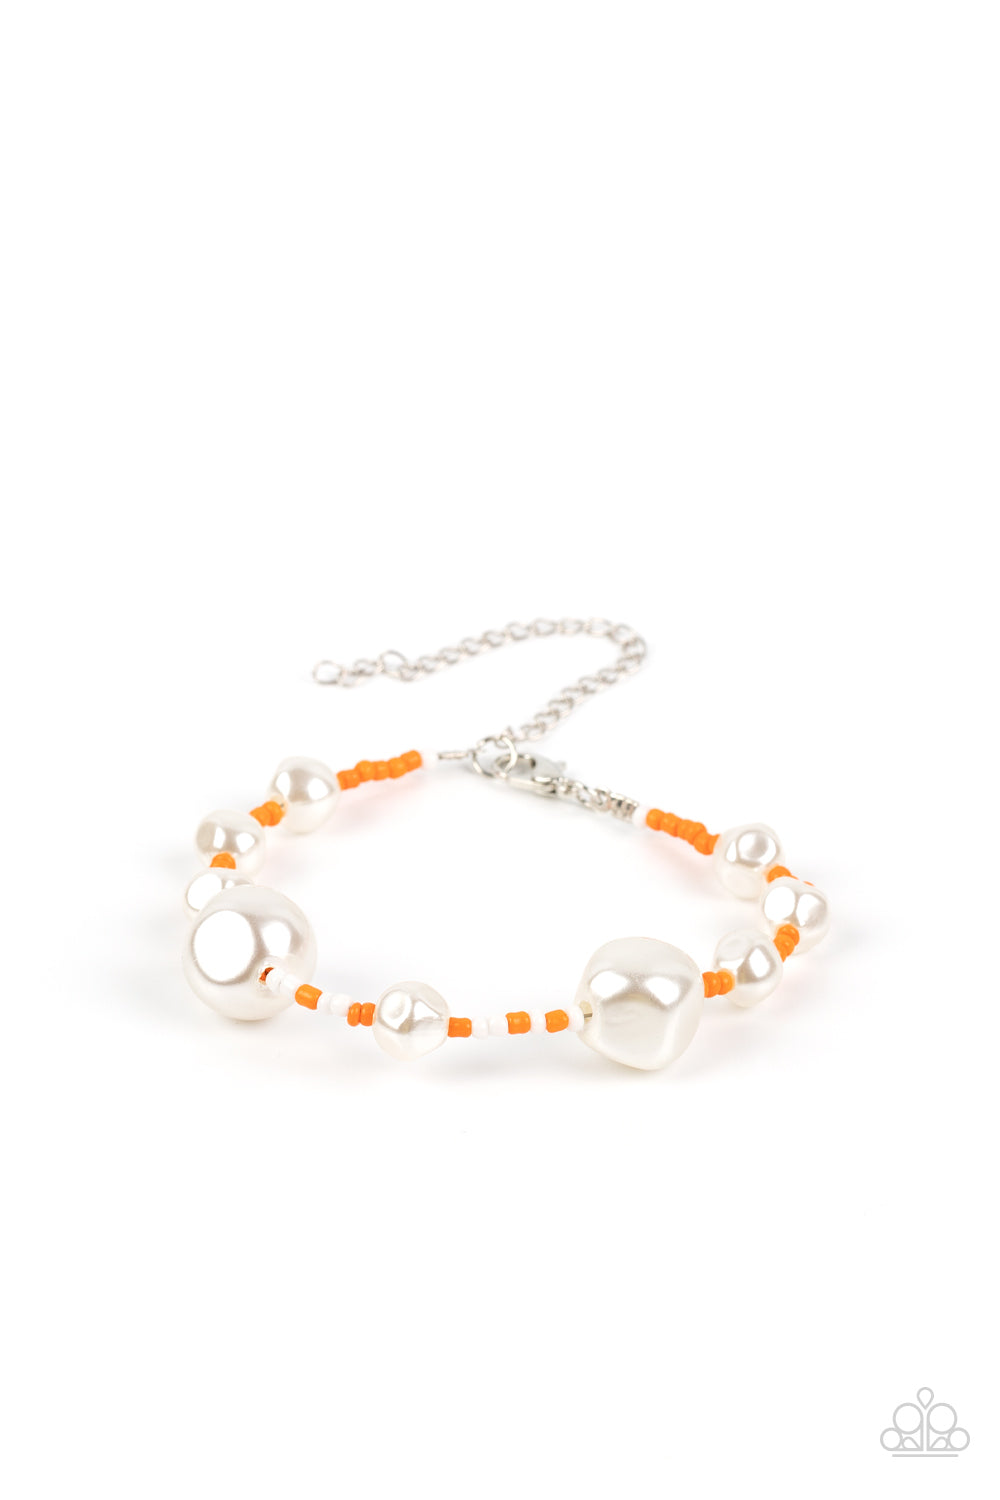 Contemporary Coastline - Orange and White Pearl Bracelet - Paparazzi Accessories - Irregular-shaped pearls in varying sizes are scattered amongst orange and white seed beads that are threaded along a wire, resulting in a refreshing and playful style around the wrist. Features an adjustable clasp closure. Sold as one individual bracelet.